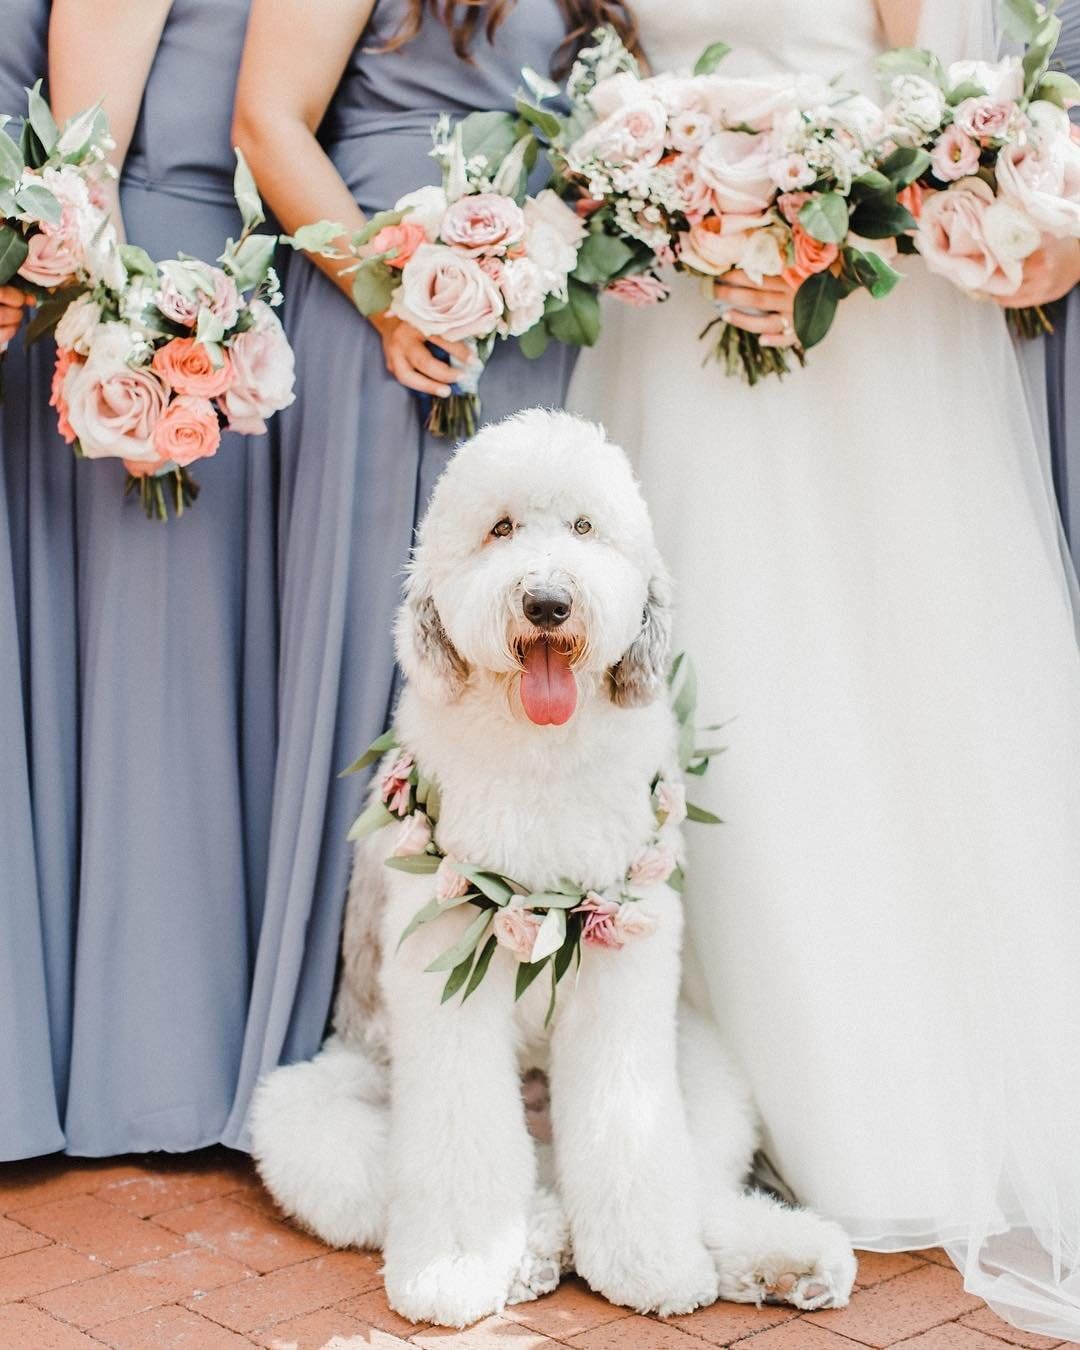 WARNING: These ridiculously cute pictures of dogs in weddings will make your day much better. // mysweetengagement.com